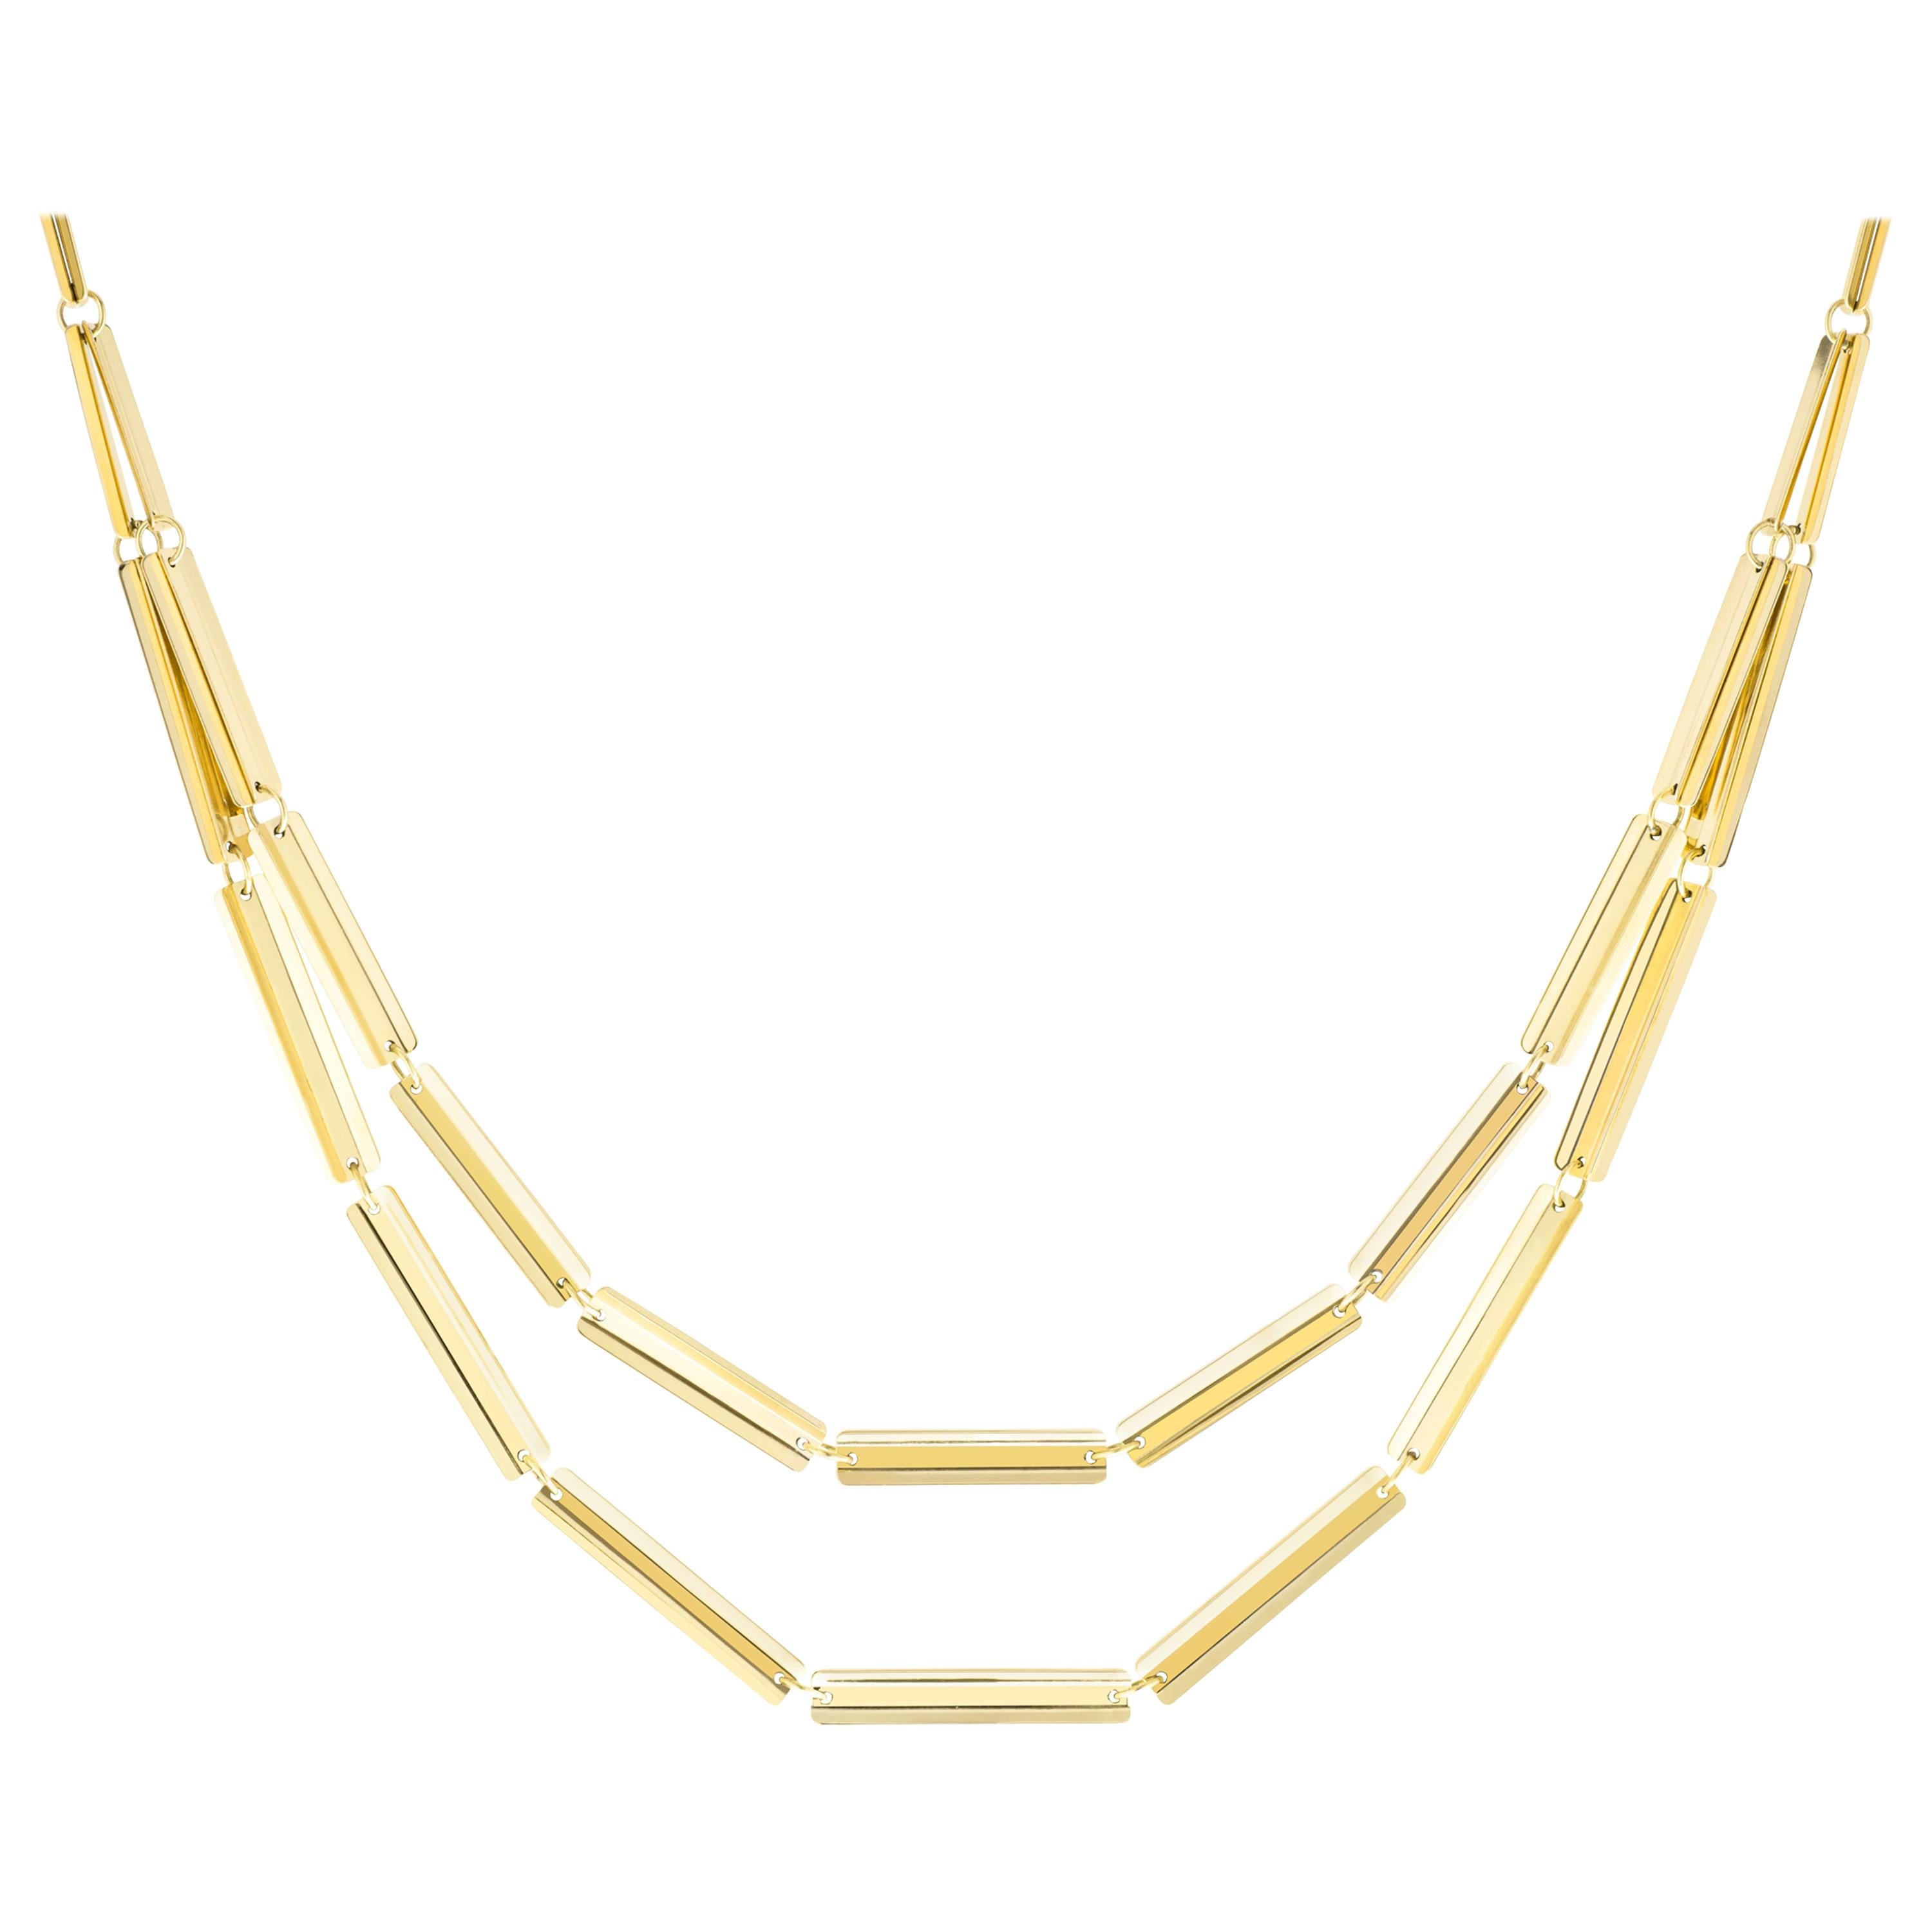 Misui 18 Karat Gold Double Strand Necklace with Rectangular Elements For Sale